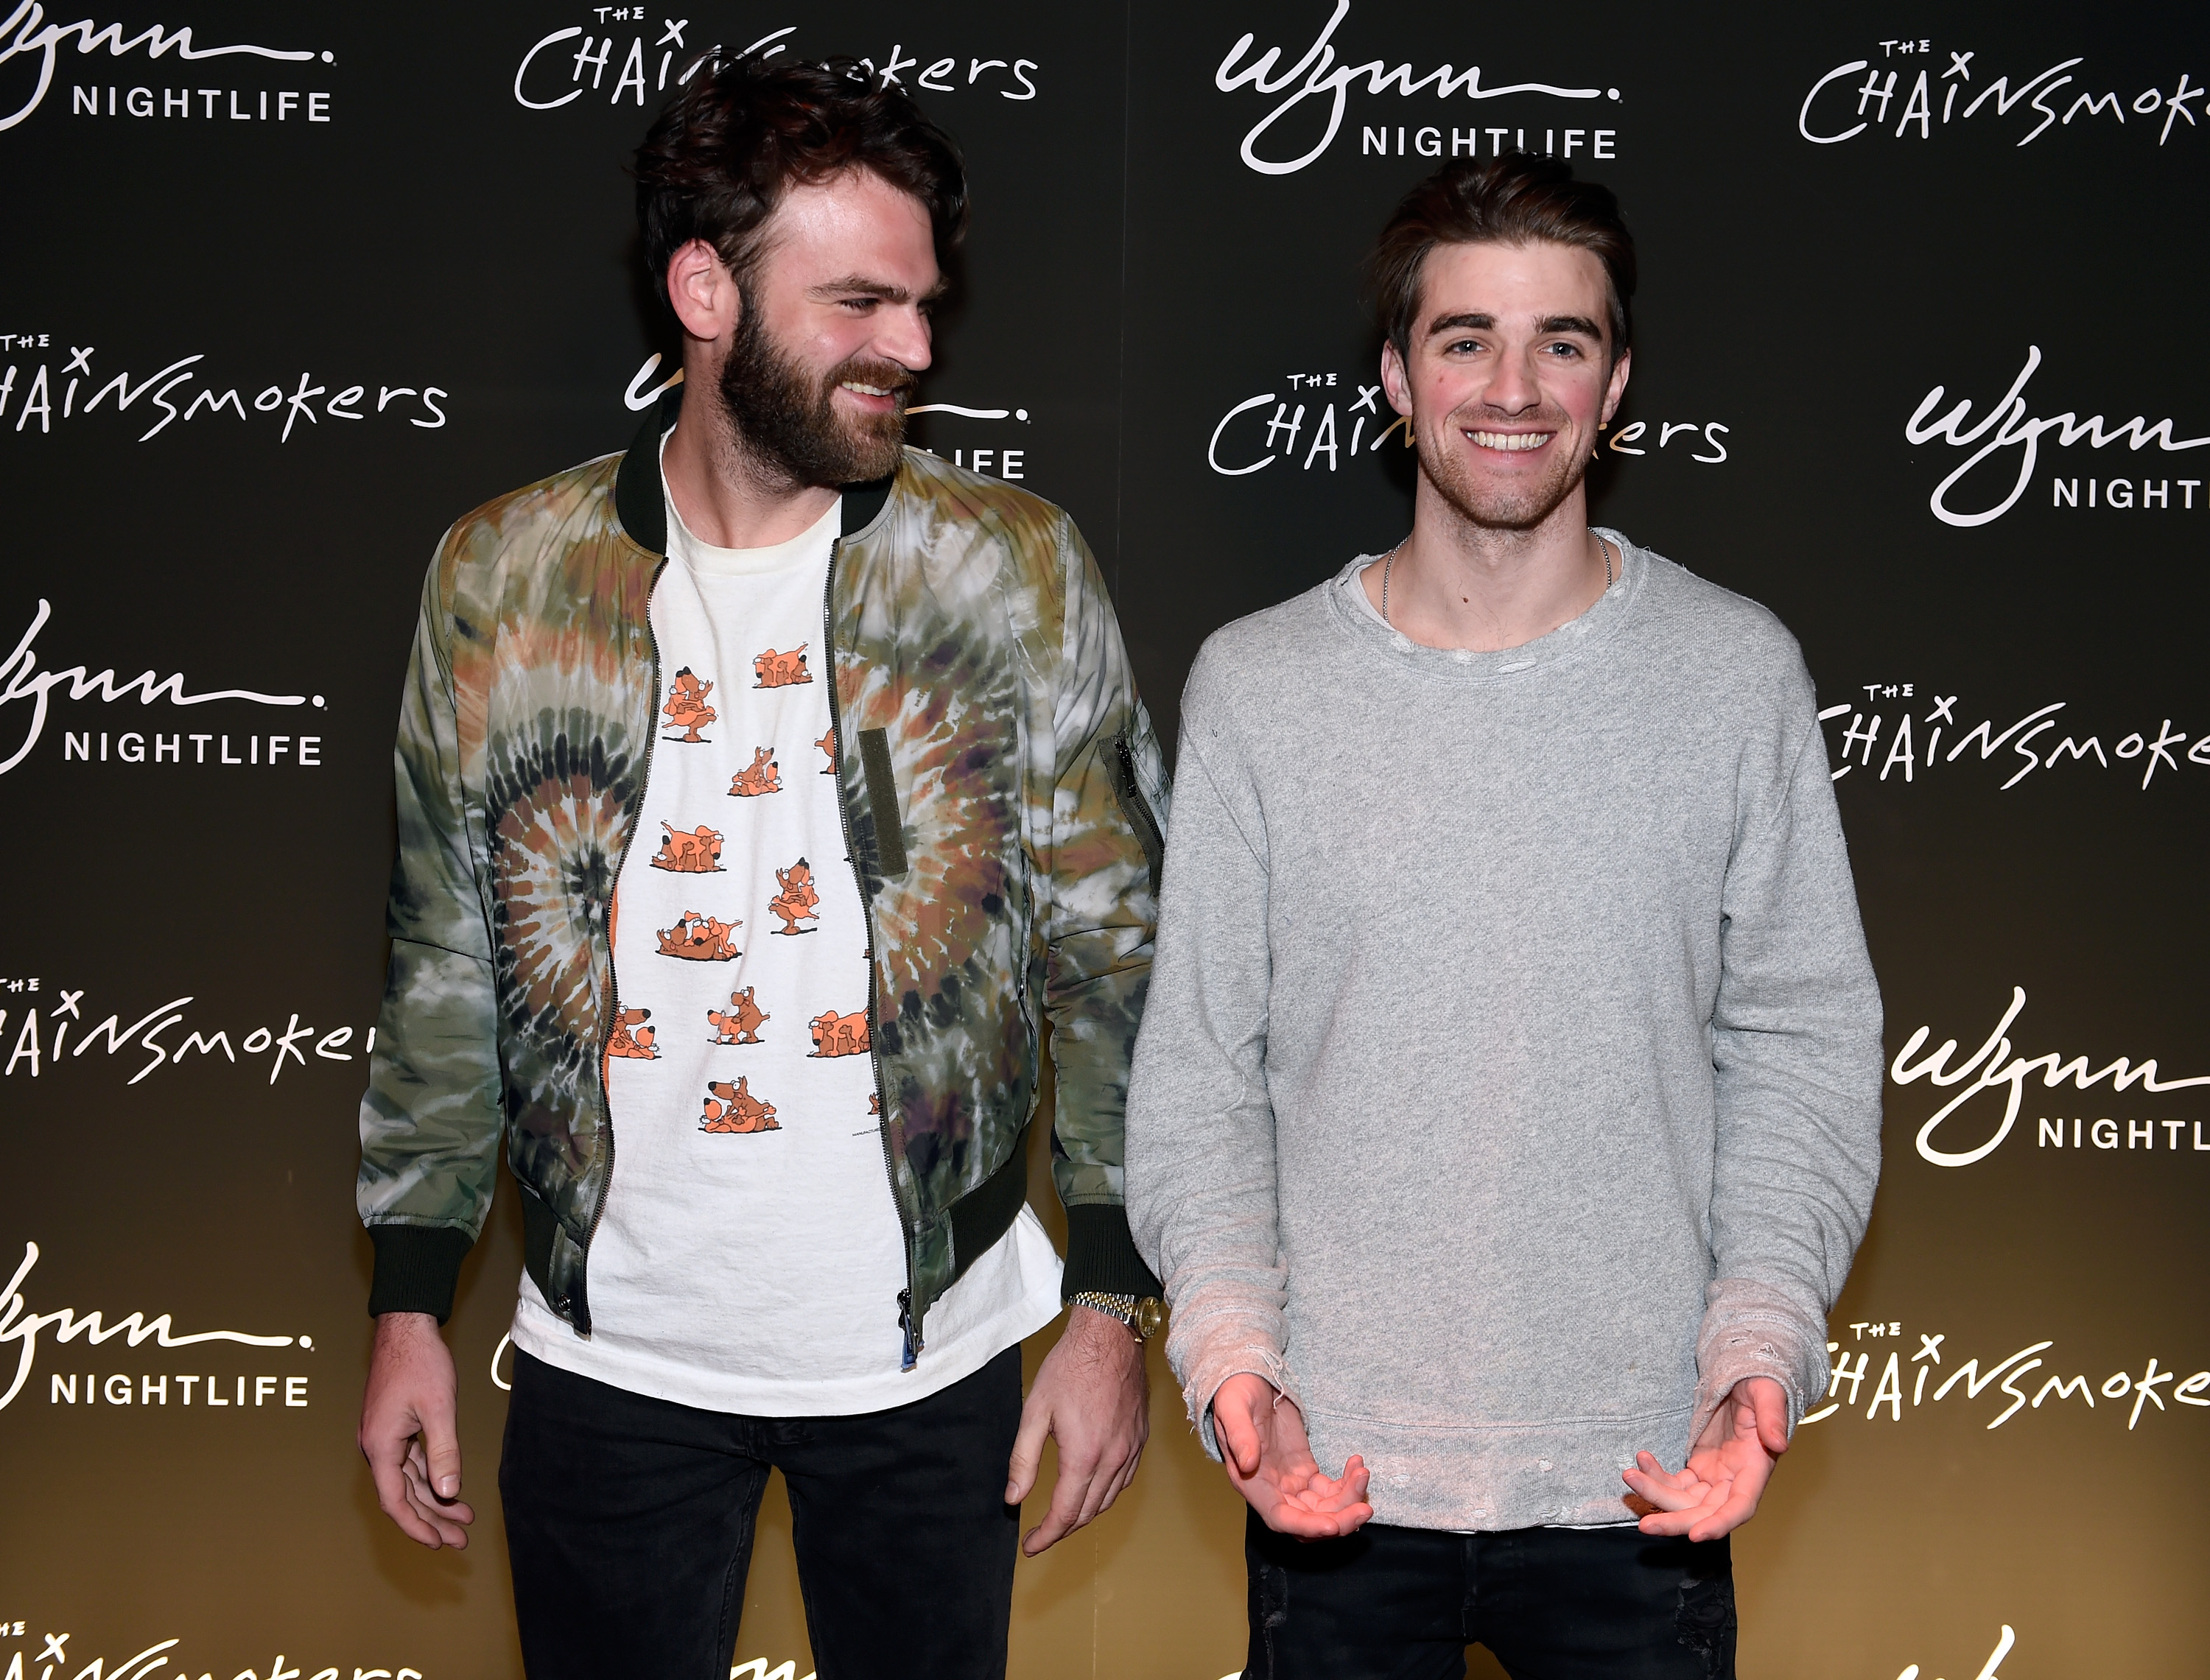 LAS VEGAS, NV - JANUARY 06: Alex Pall (L) and Andrew Taggart of The Chainsmokers arrive at XS Nightclub for the kick off a three-year Wynn Nightlife residency in Las Vegas on January 6, 2017 in Las Vegas, Nevada.   David Becker/Getty Images for Wynn Las Vegas/AFP